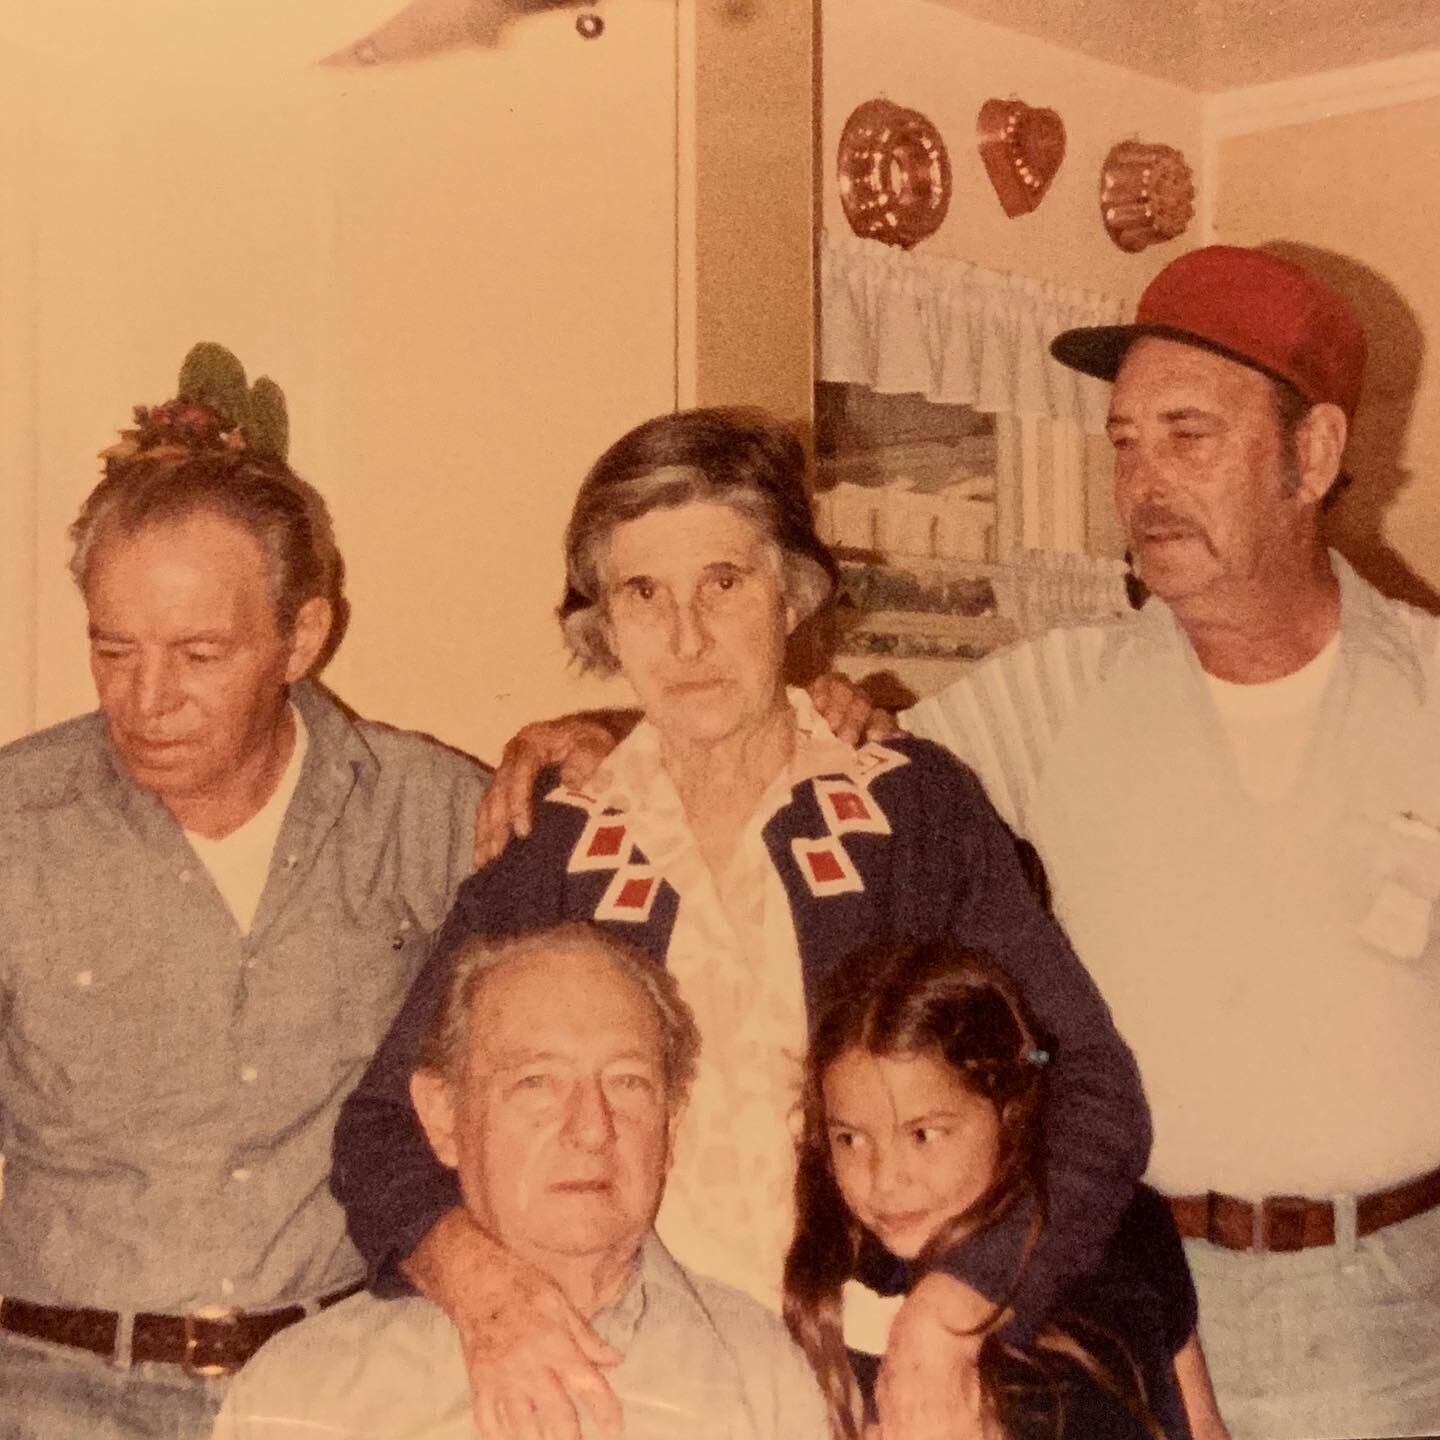 me with some of the #orphans and #runaways i mentioned in my last reading in @feothebook 
Grandpa Neal (left) Louisiana-born, ran away from an orphanage in Texas and hopped trains to California, where he later joined the navy and found his brother Ca